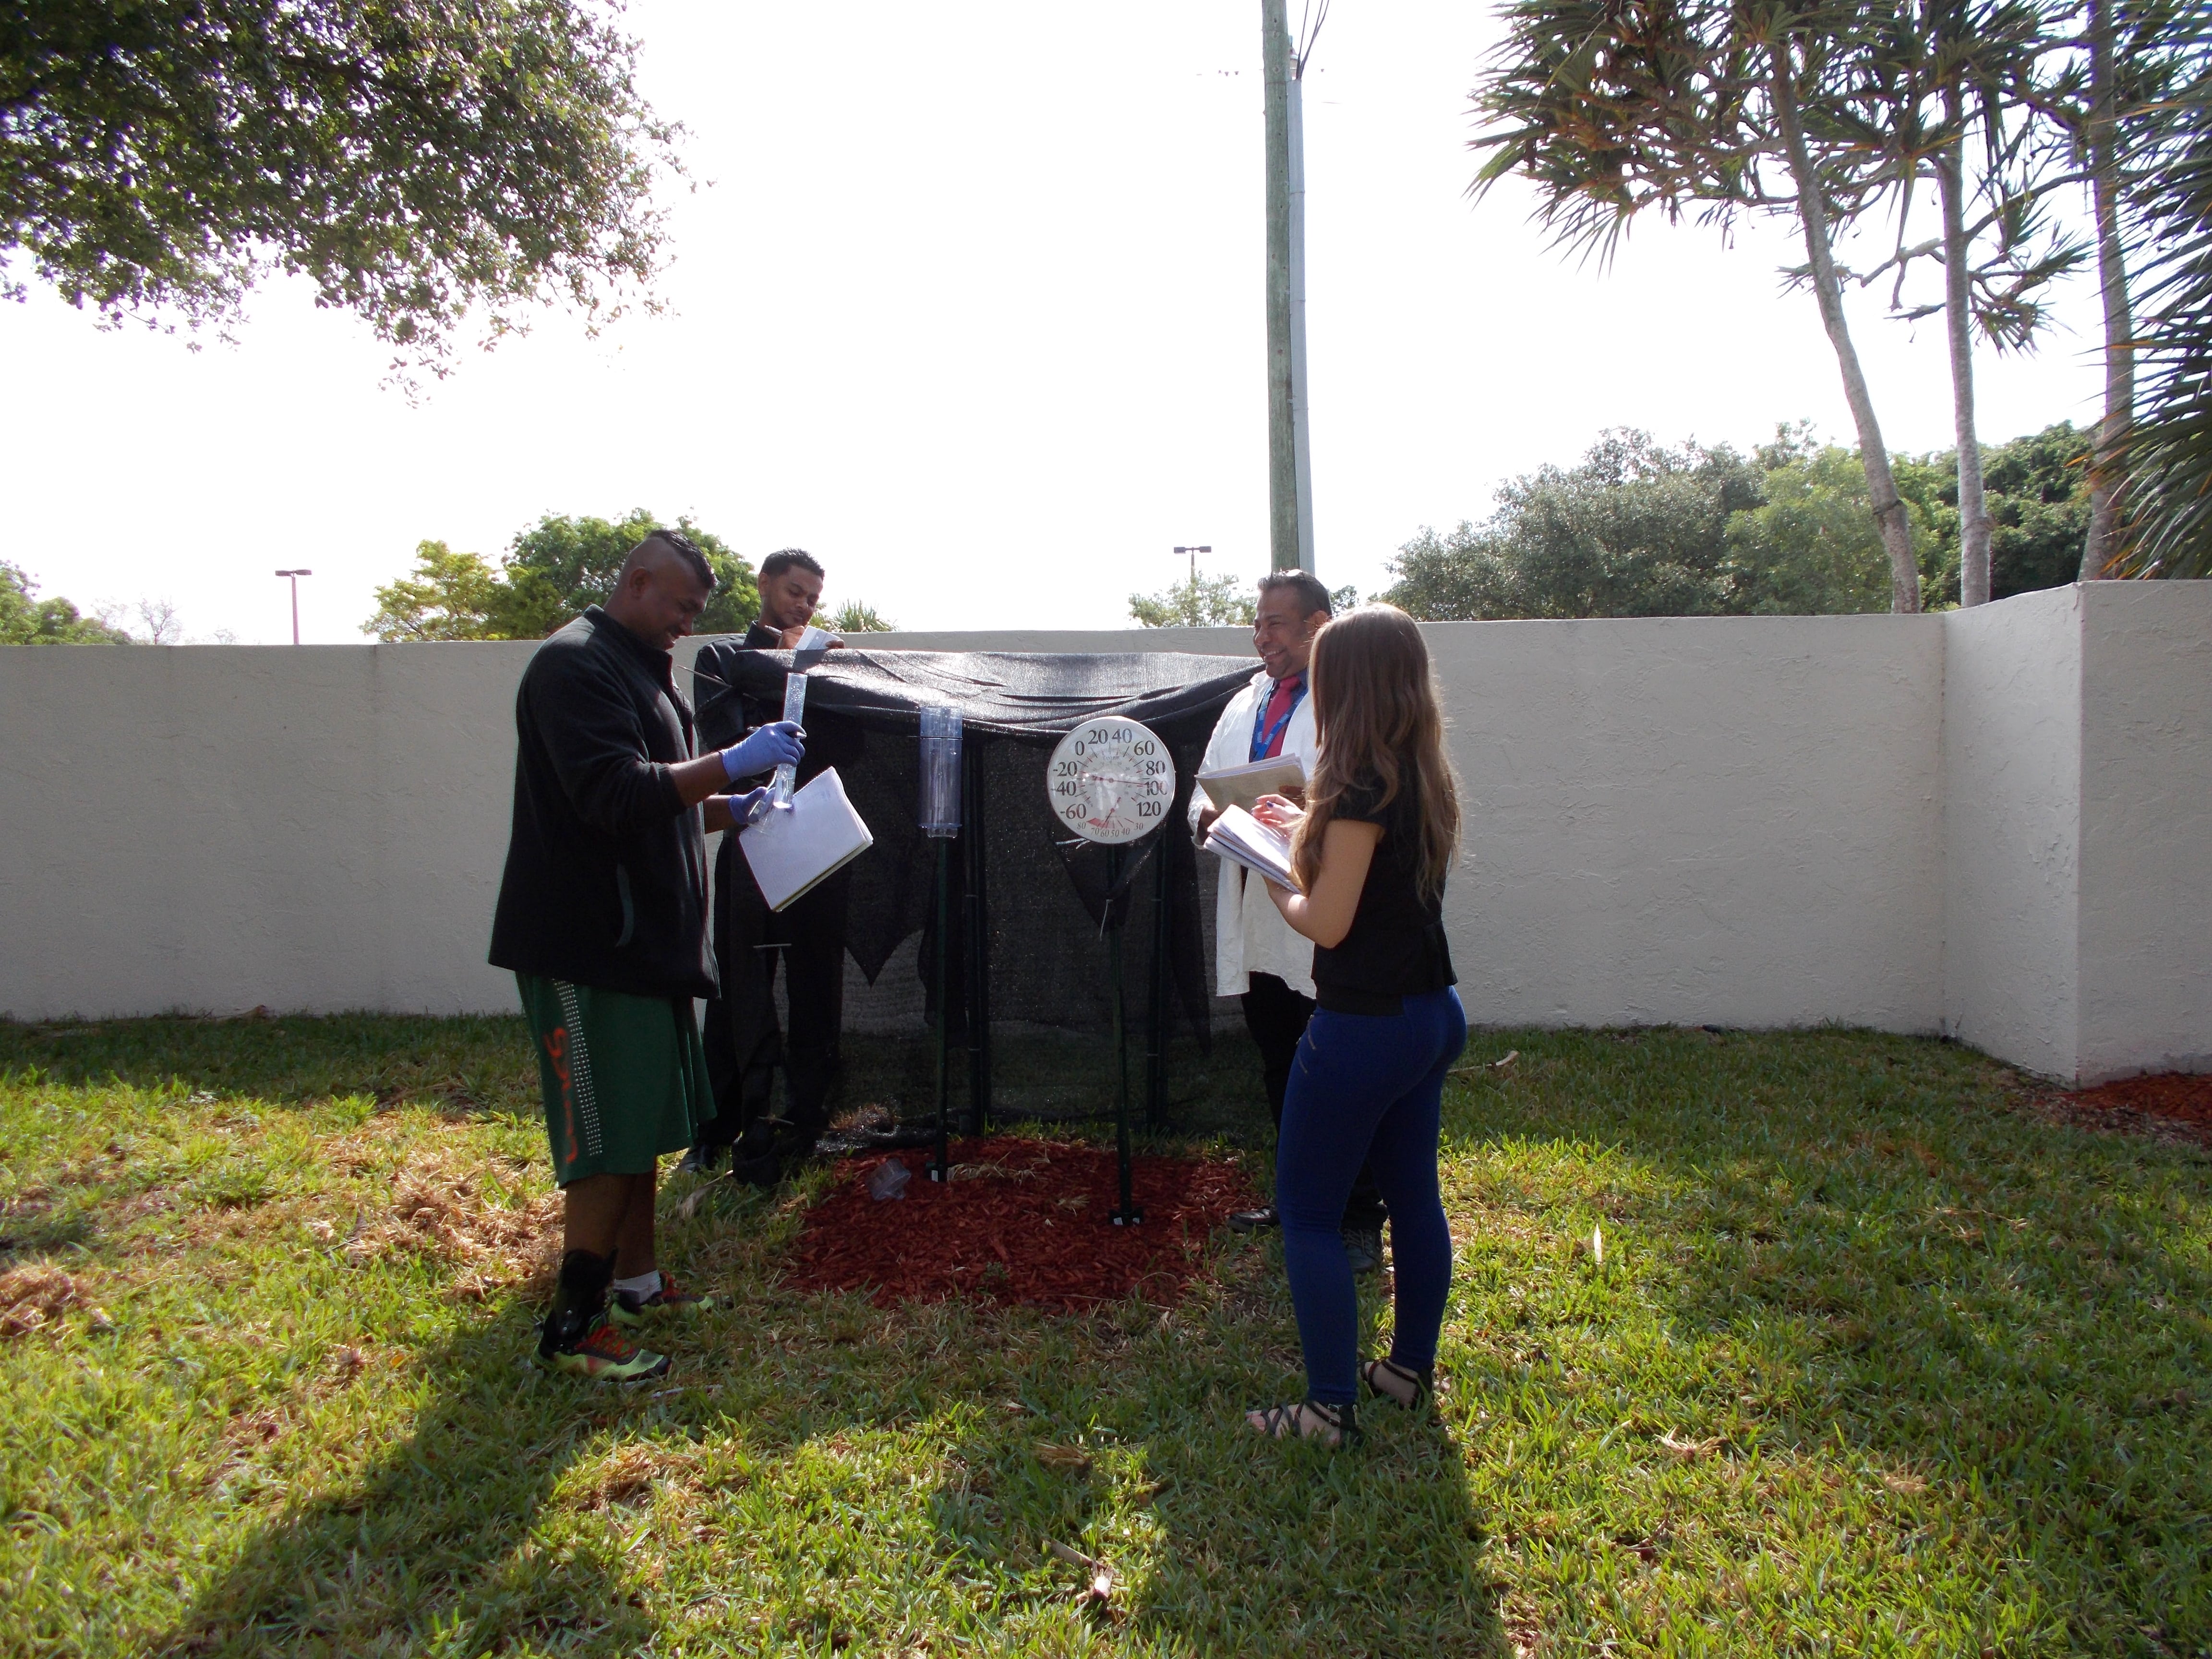 Ft. Lauderdale Students Conduct a Study Looking at Weather in South Florida